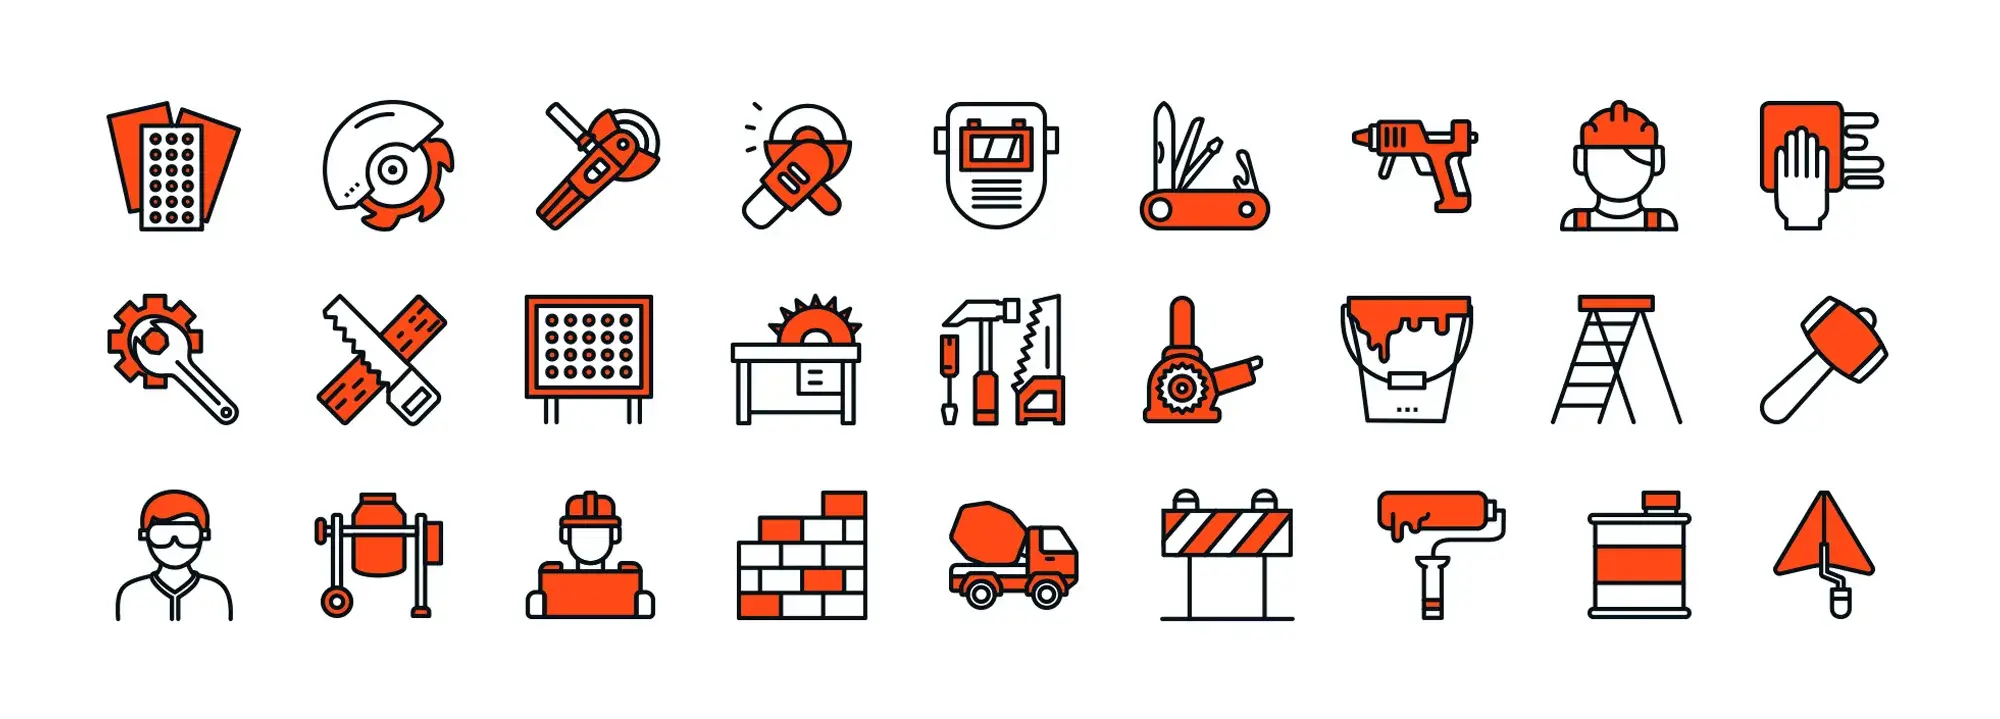 Collection of modern free WordPress icons for dynamic web projects